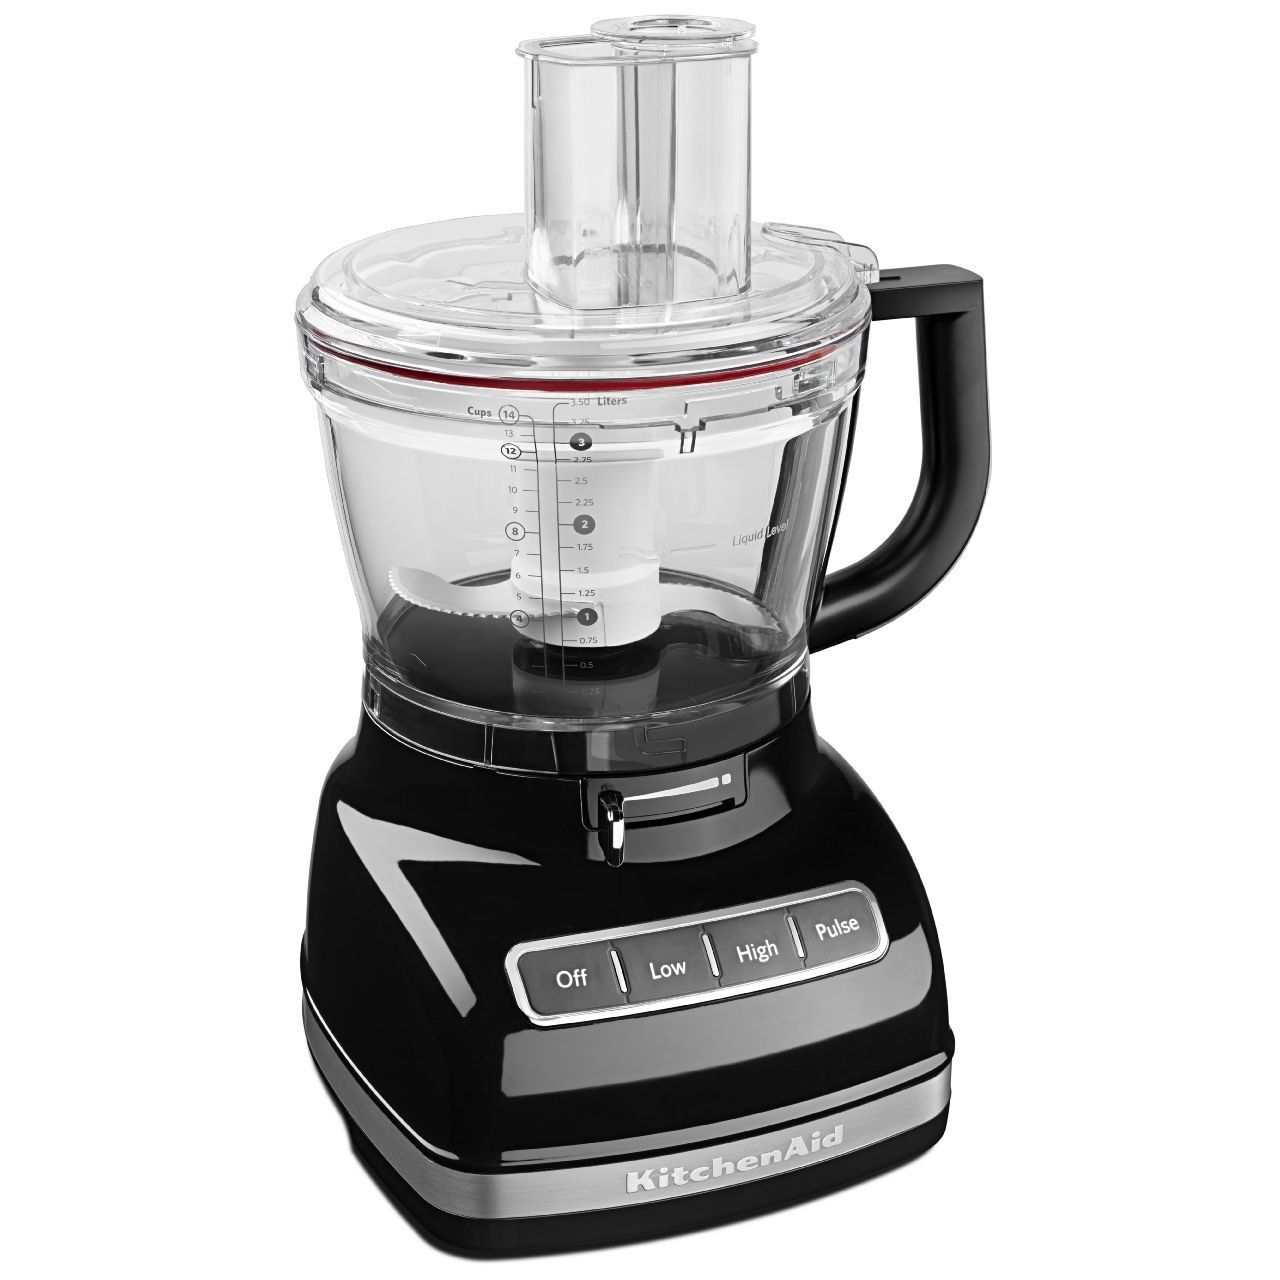 https://ak1.ostkcdn.com/images/products/9246150/KitchenAid-KFP1466-14-cup-Food-Processor-with-Commercial-style-Dicing-Kit-3123efaa-aee5-4b71-94db-d19f96e5a007.jpg